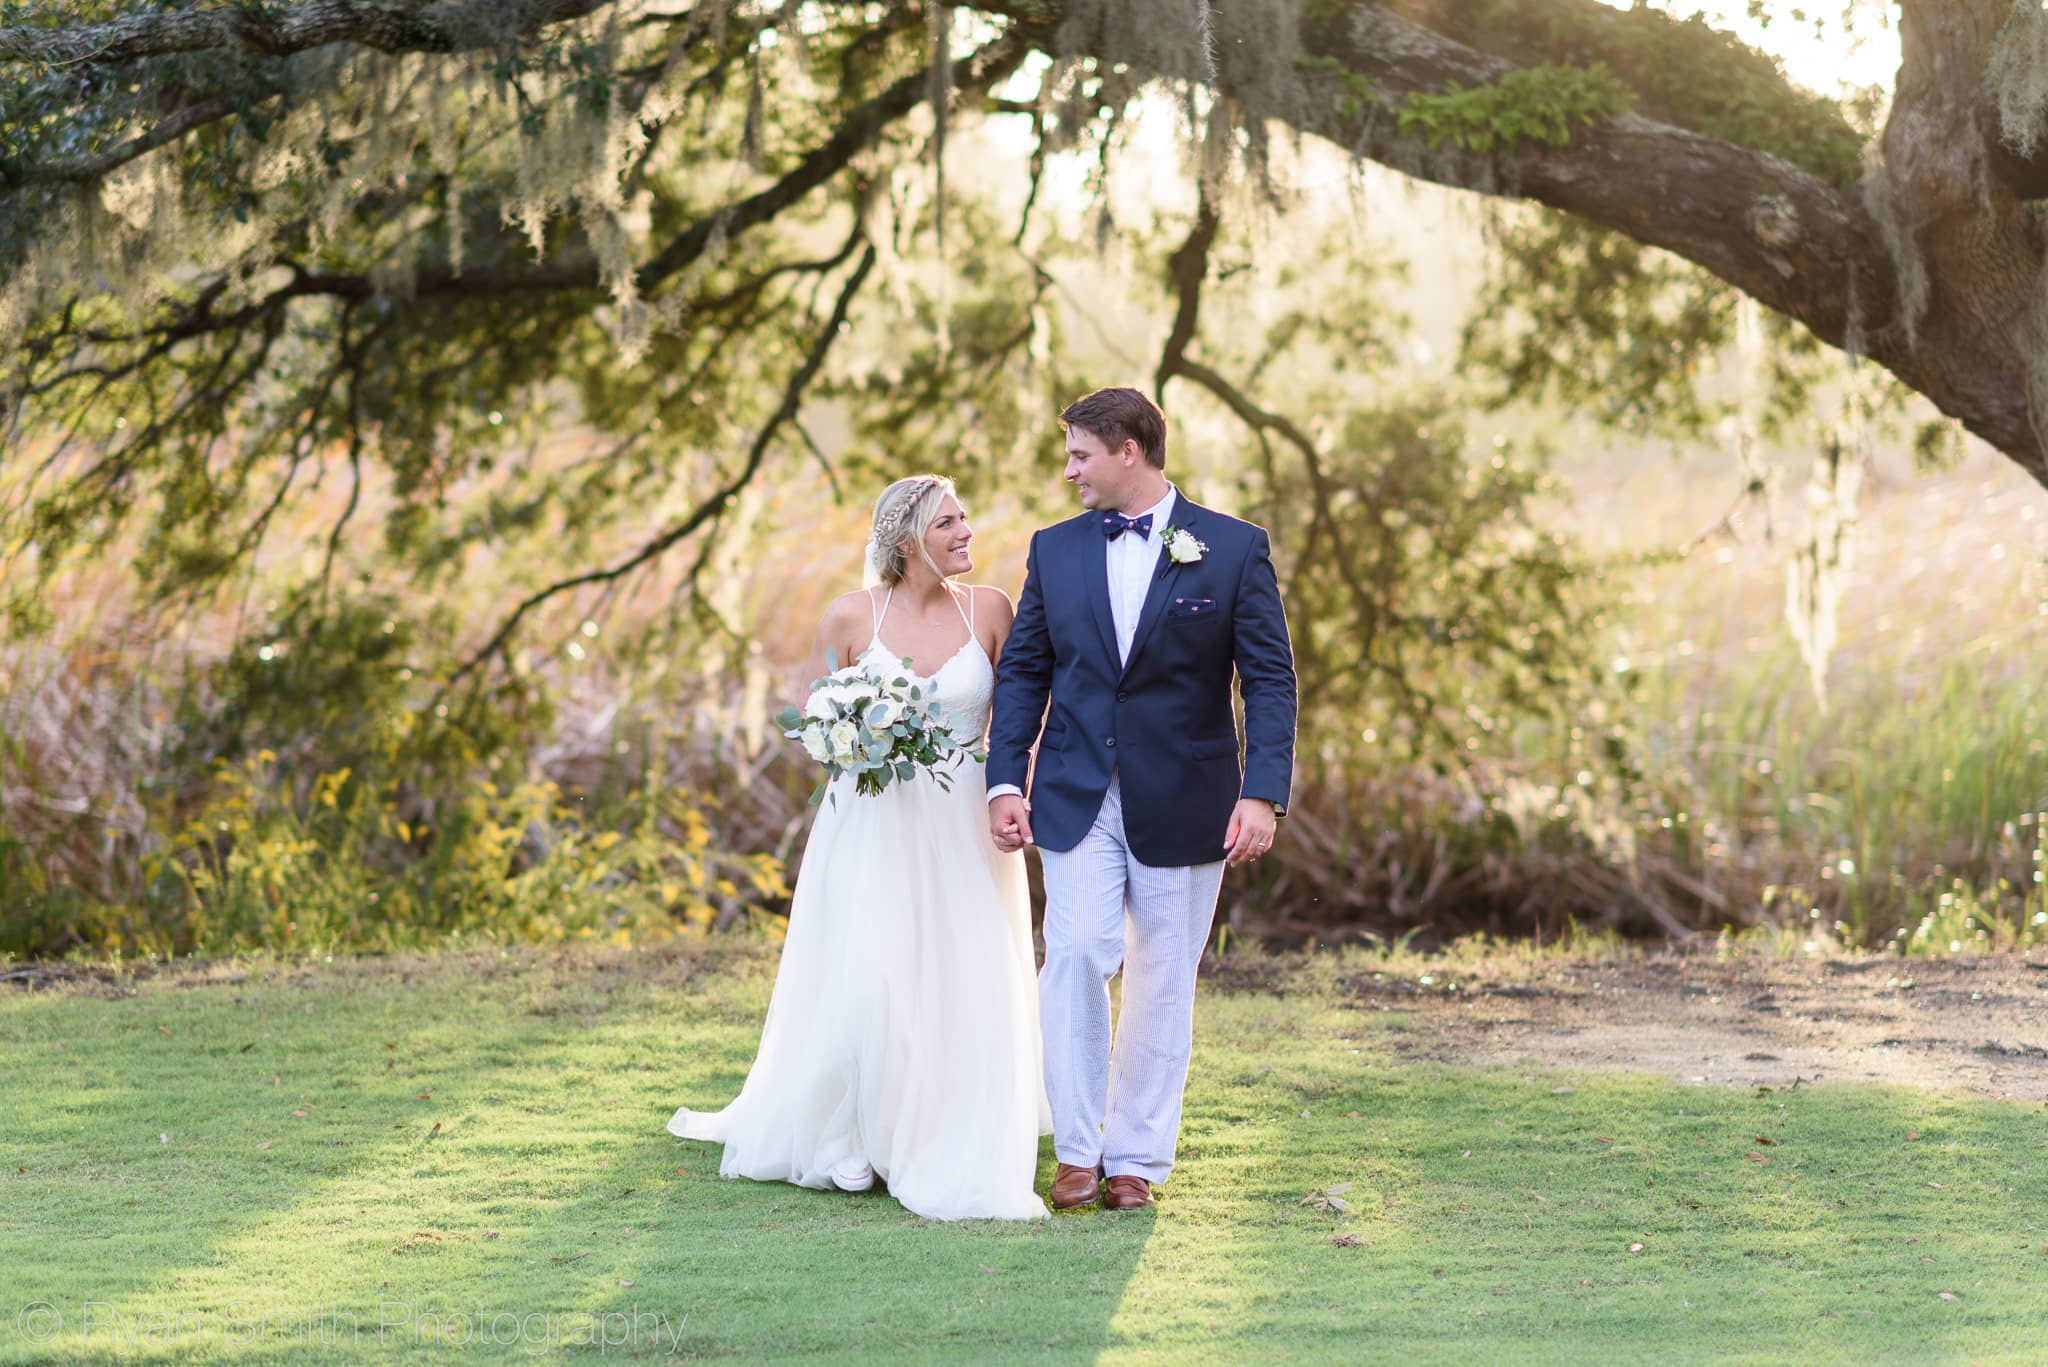 Bride and groom walking together in the sunset - Pawleys Plantation